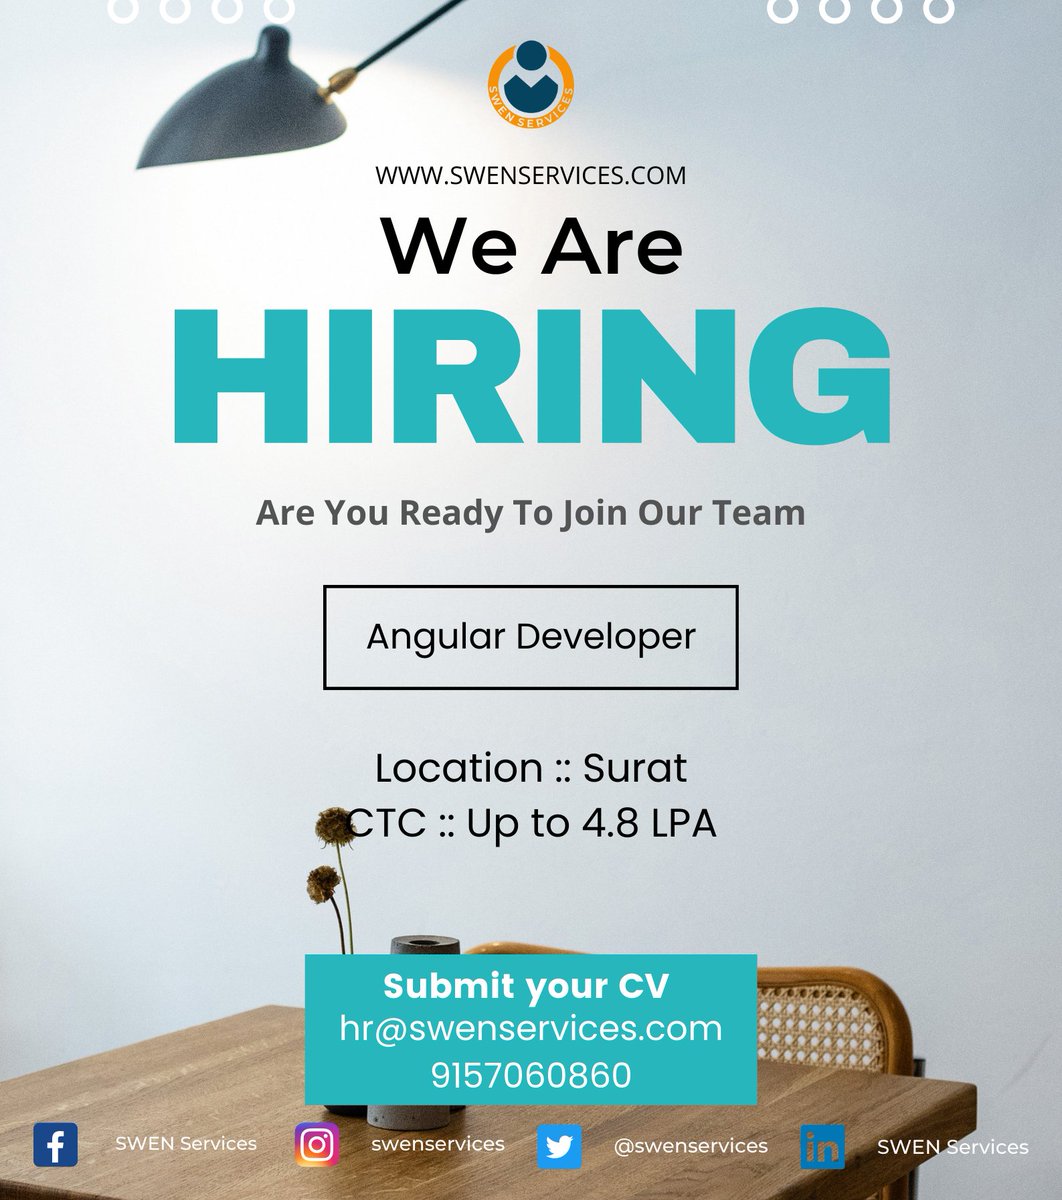 #hiringfordevelopers
#angulardeveloper
#suratcity
#ctc :: Up to 4.8 LPA
#hiringimmediately #getjob #free #nocommission #nocharges #noregistration #nofees
Call or share your CV on 9157060860 for more details.
#angularjobs #jobsinindia #suratithub #suratitjobs #itjobsindia